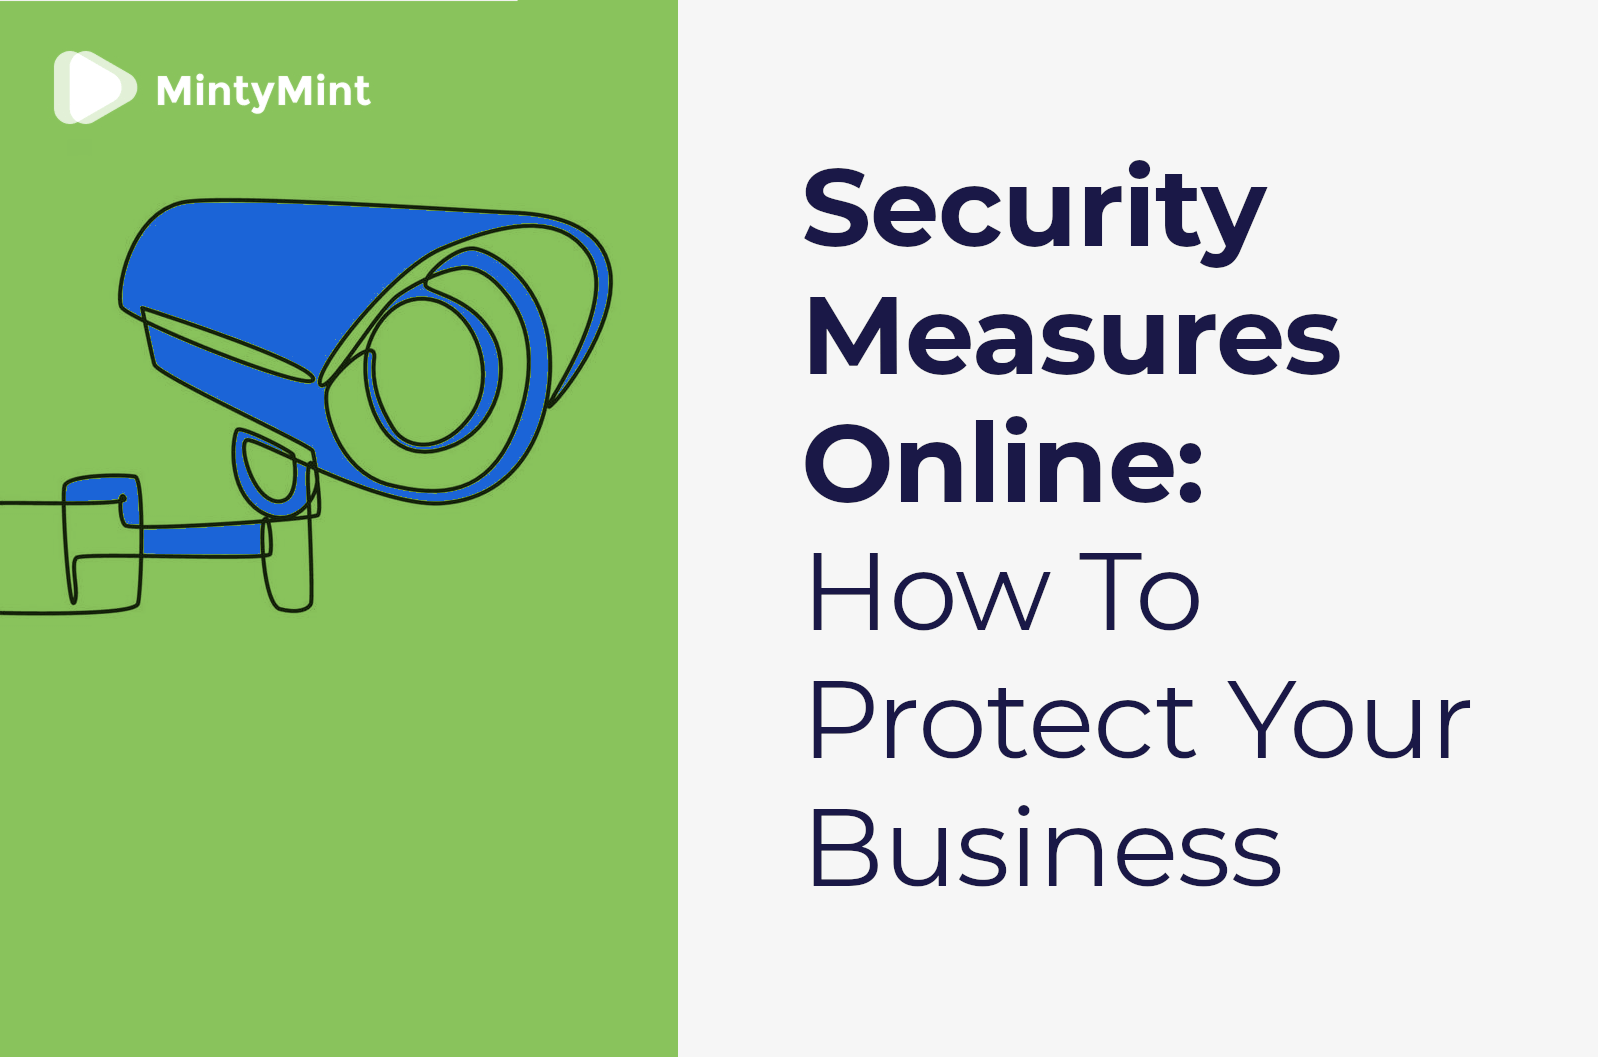 security measures online: how to protect your business from cyber attacks